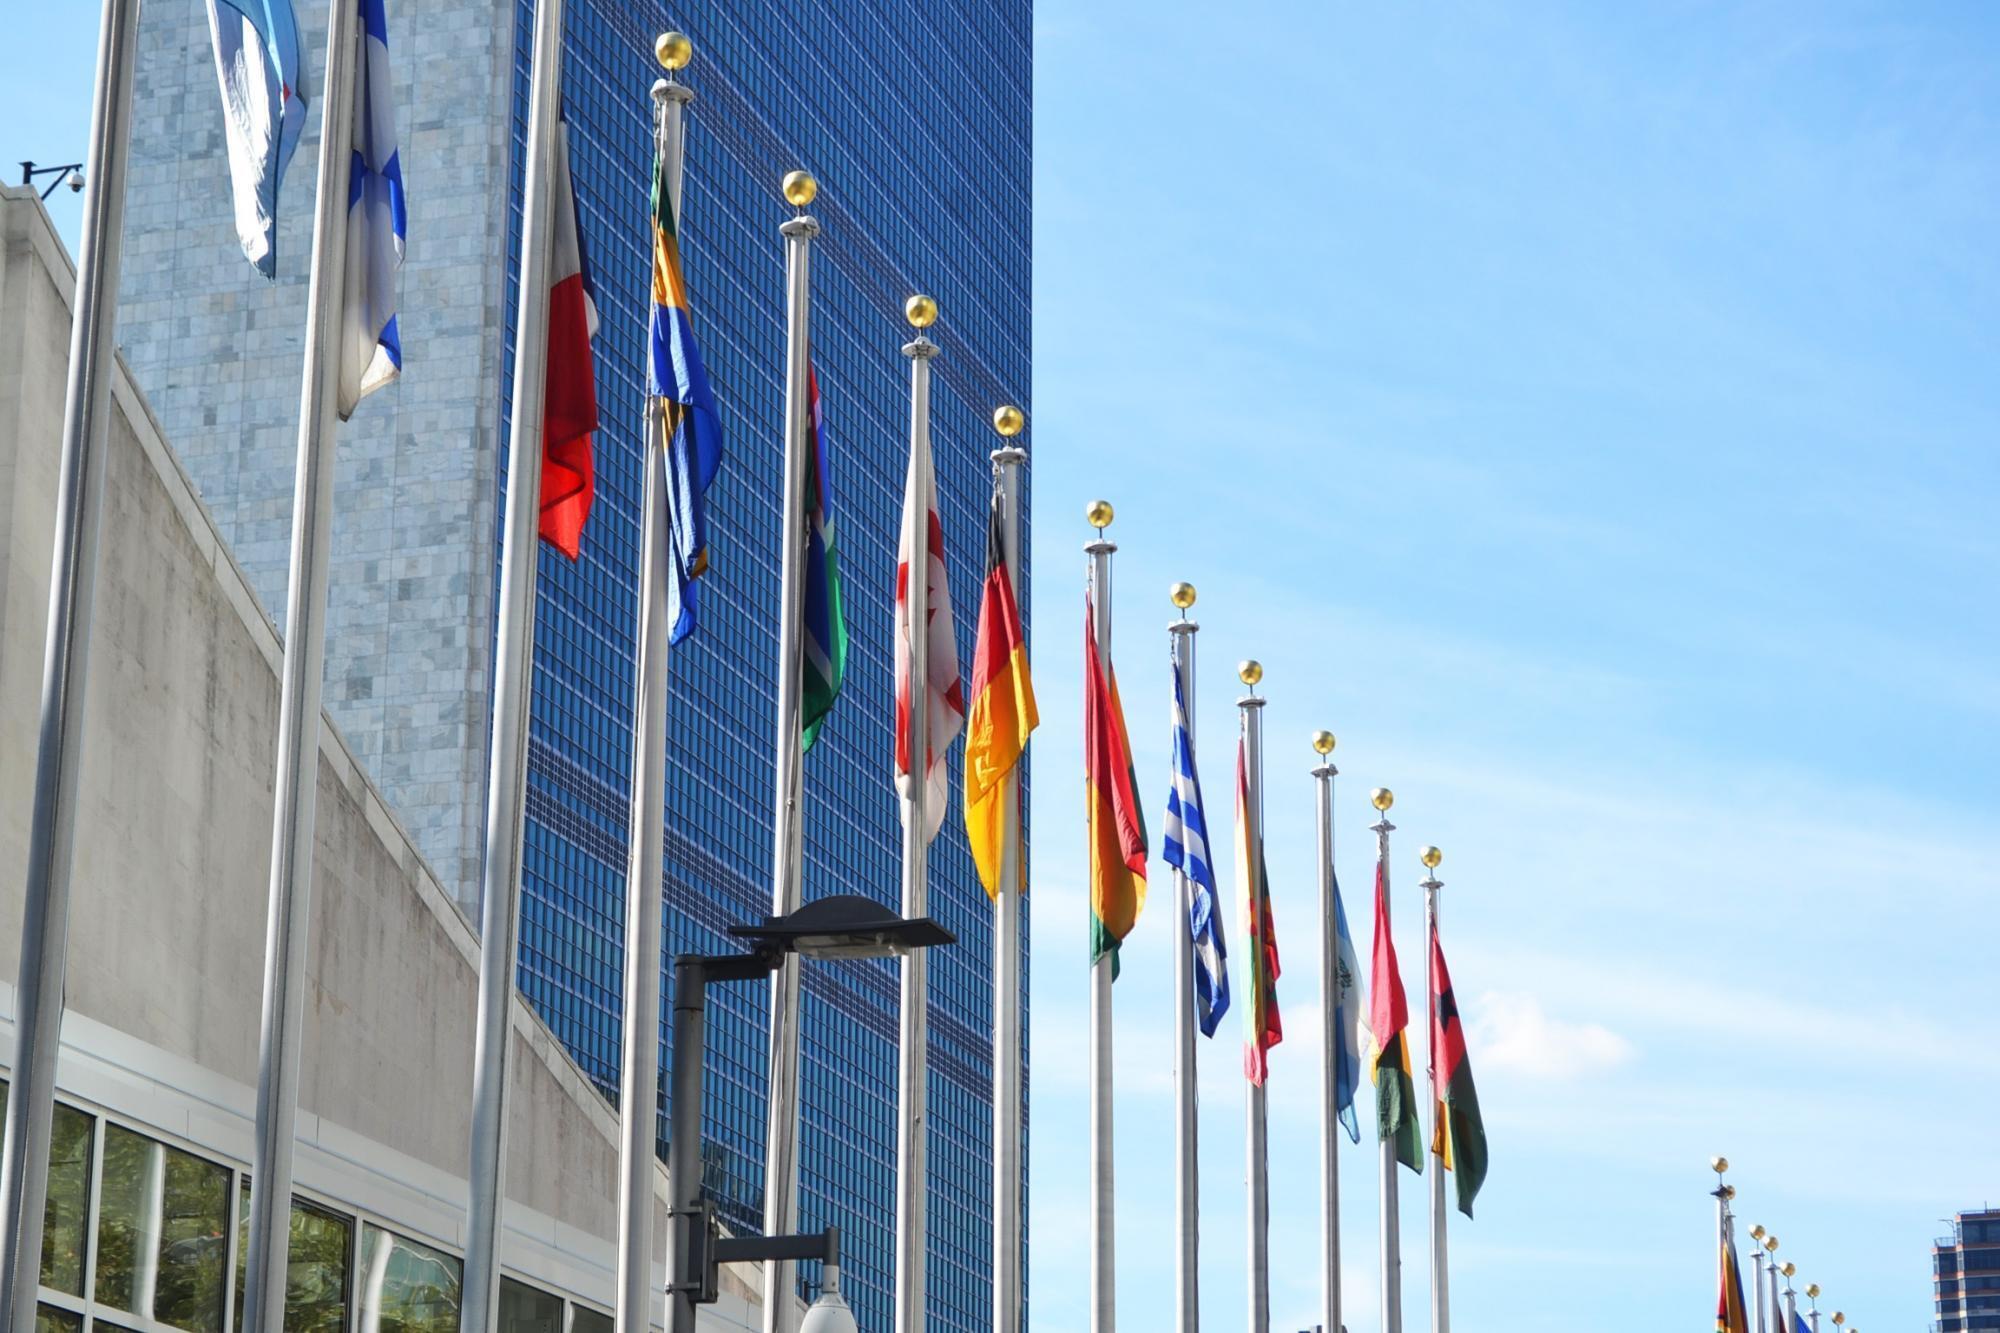 Flags outside the United Nations office